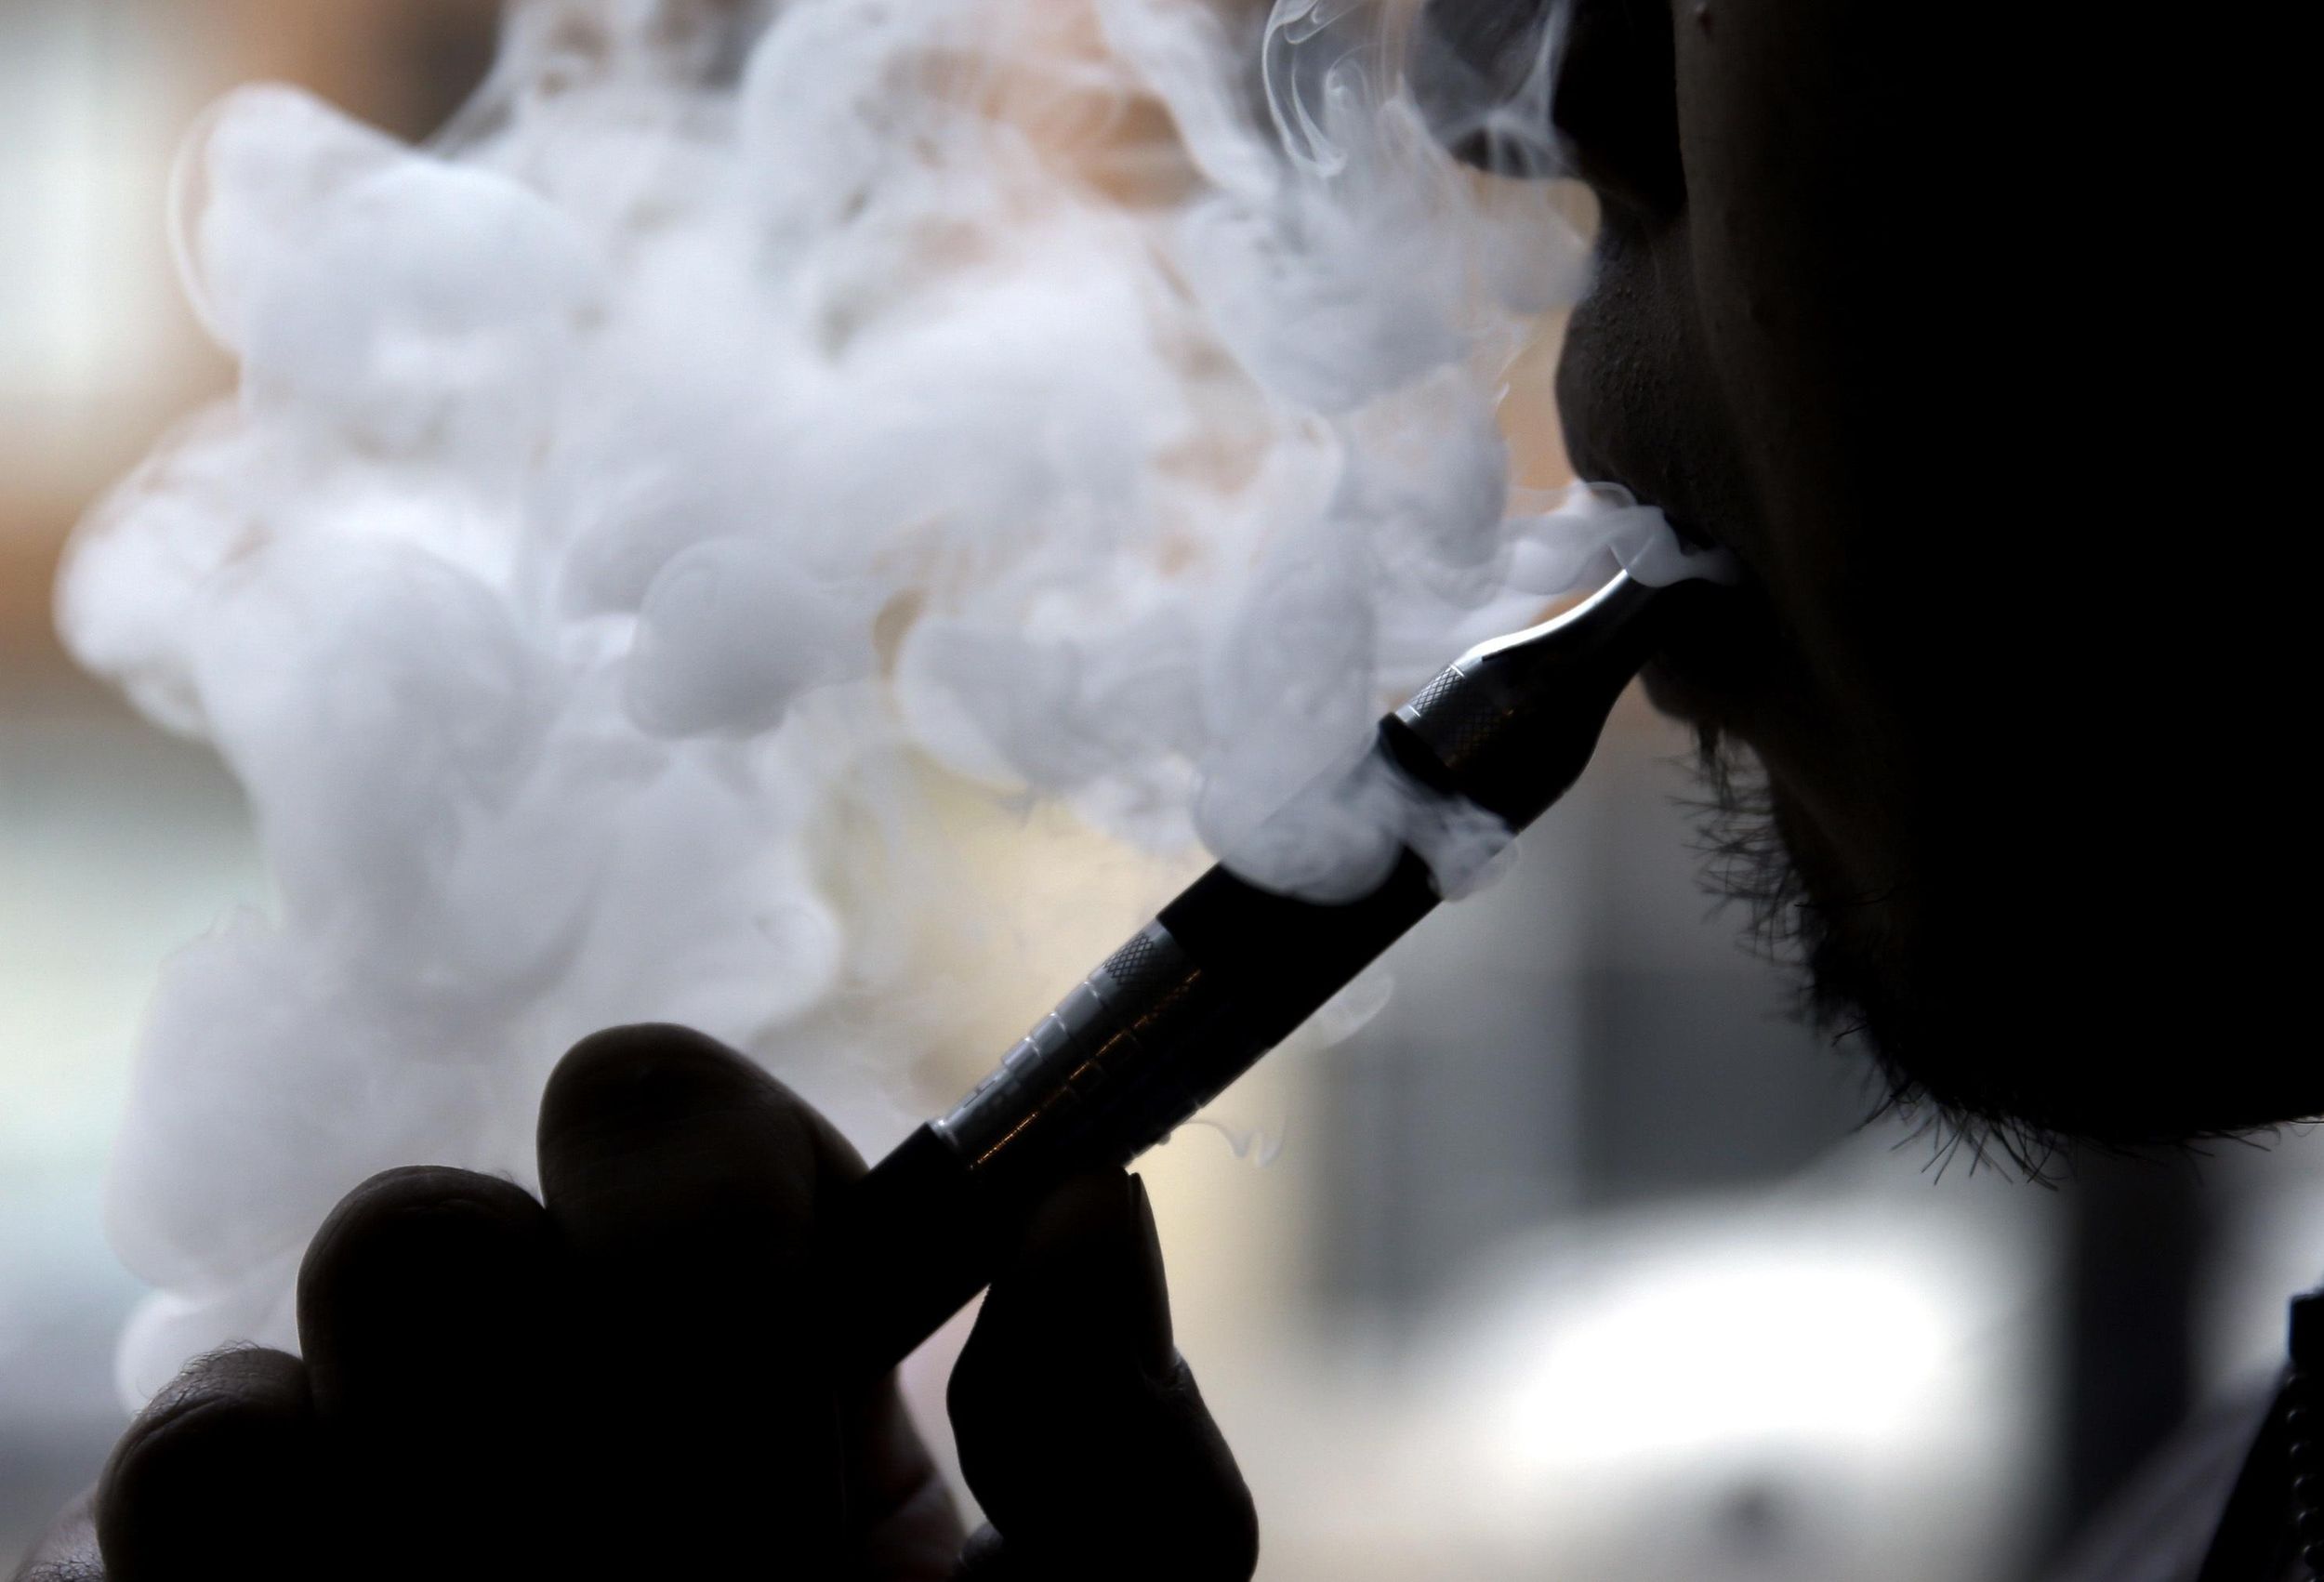 Hospitalizations Tied To Vaping On The Rise The Spokesman Review 